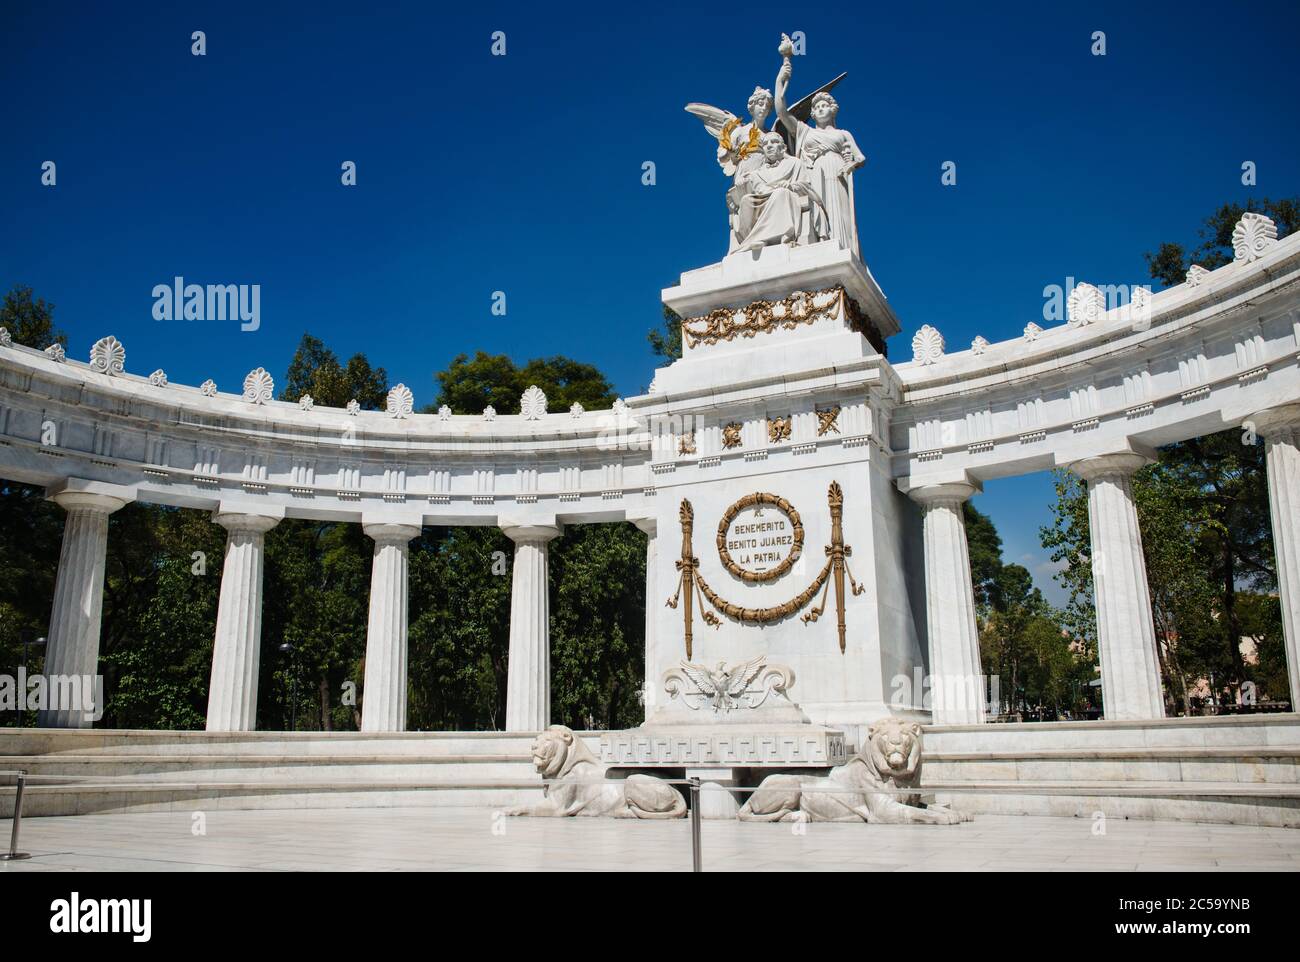 monument in front of colonnade, Hemiciclo a Benito Juarez, Mexico city, Mexico Stock Photo